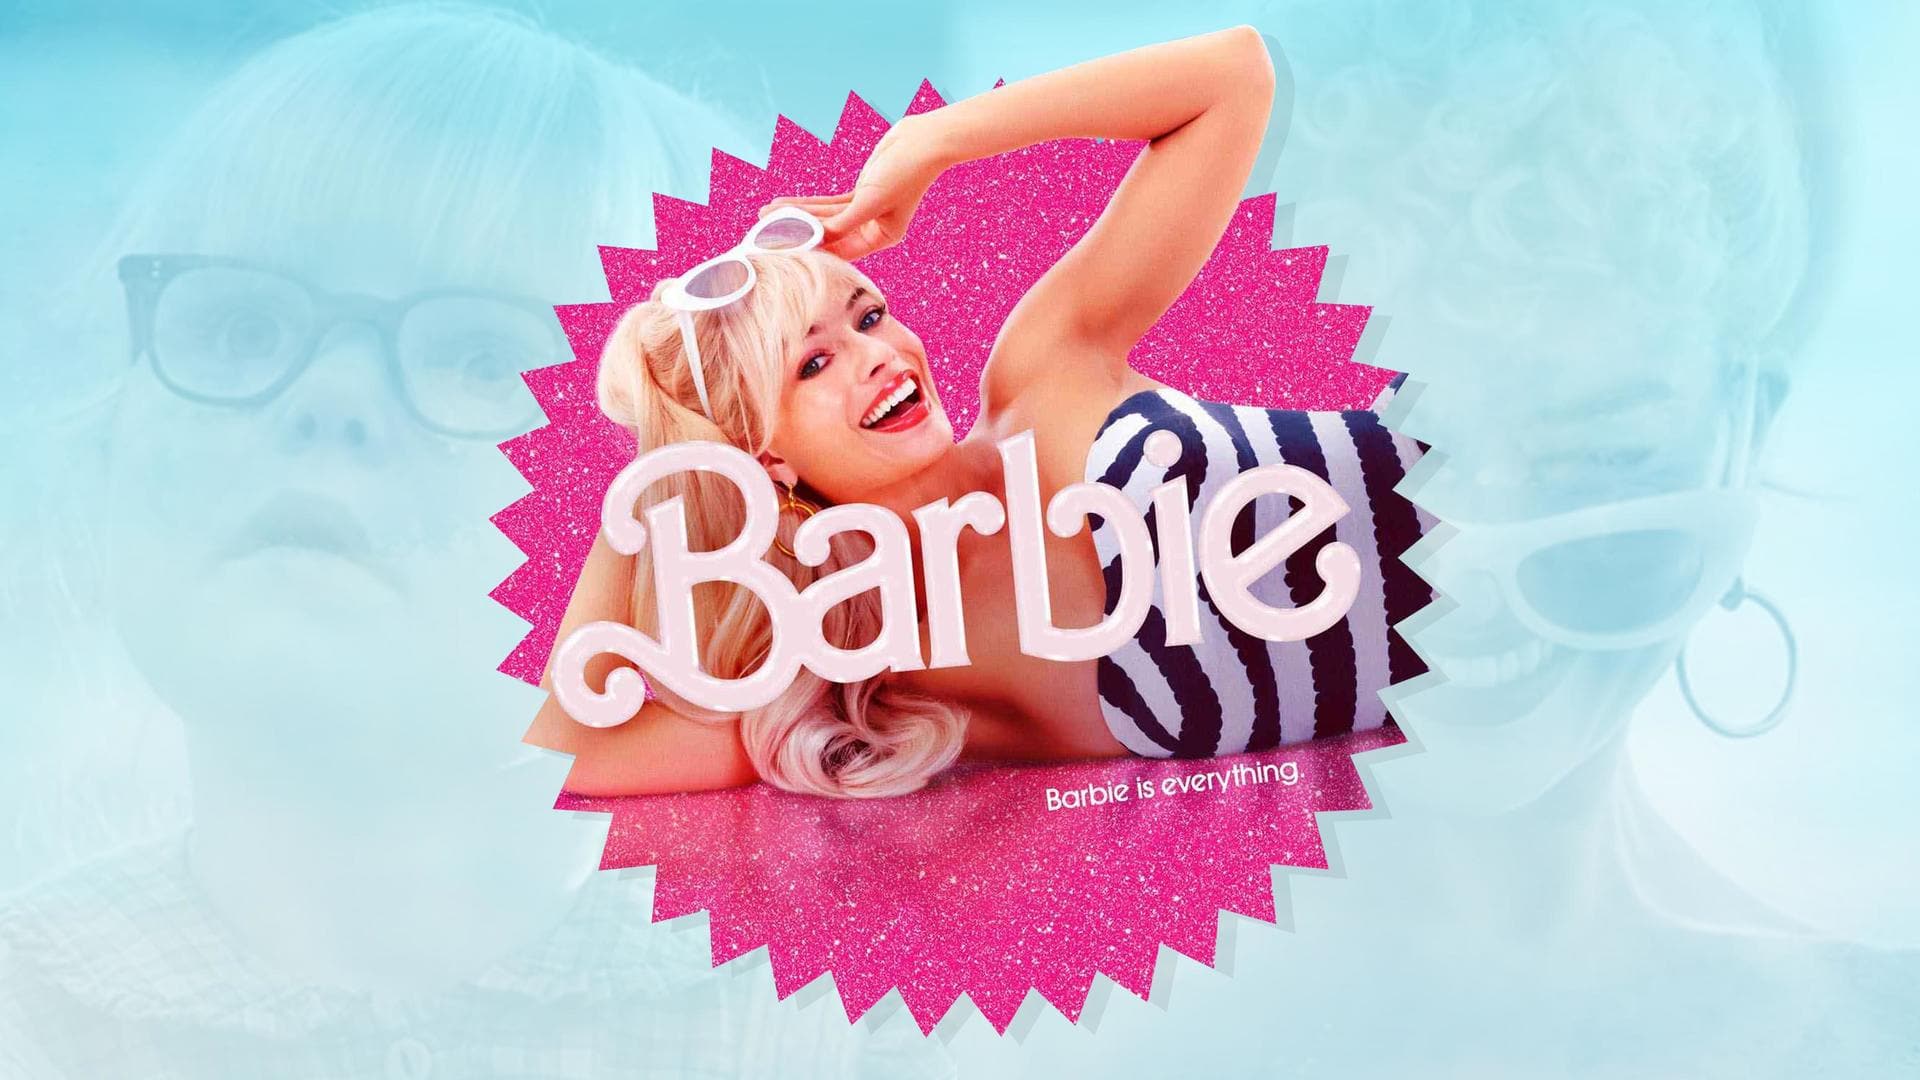 Here's why Twitterati is going gaga over 'Barbie' teaser